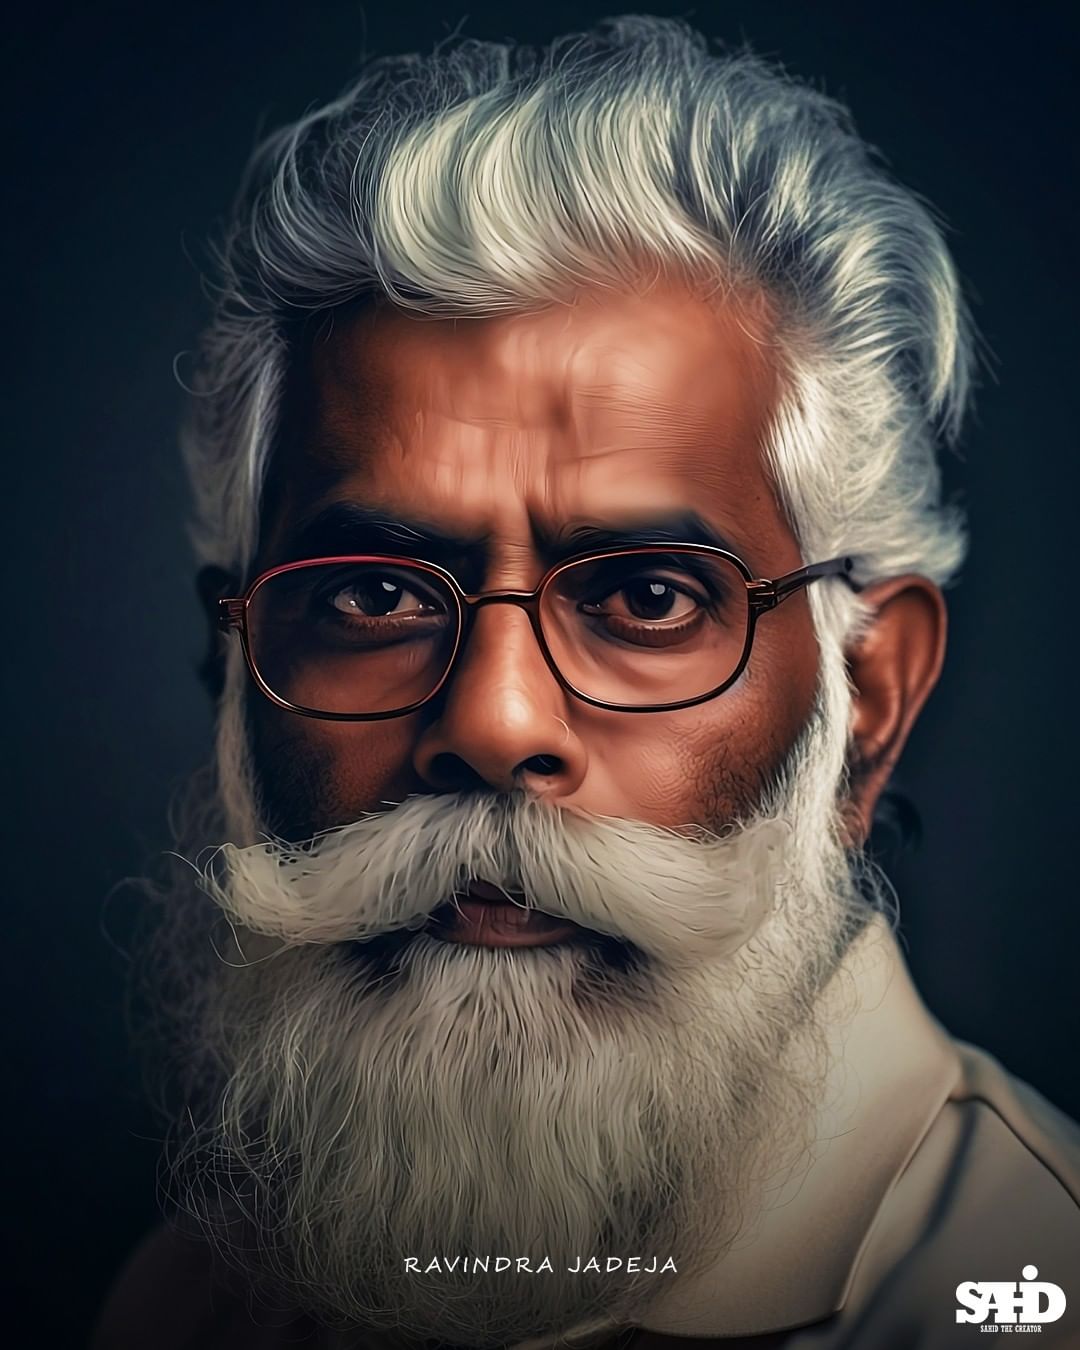 Cricketers as elderly men | AI Images of Indian Cricketers | KreedOn